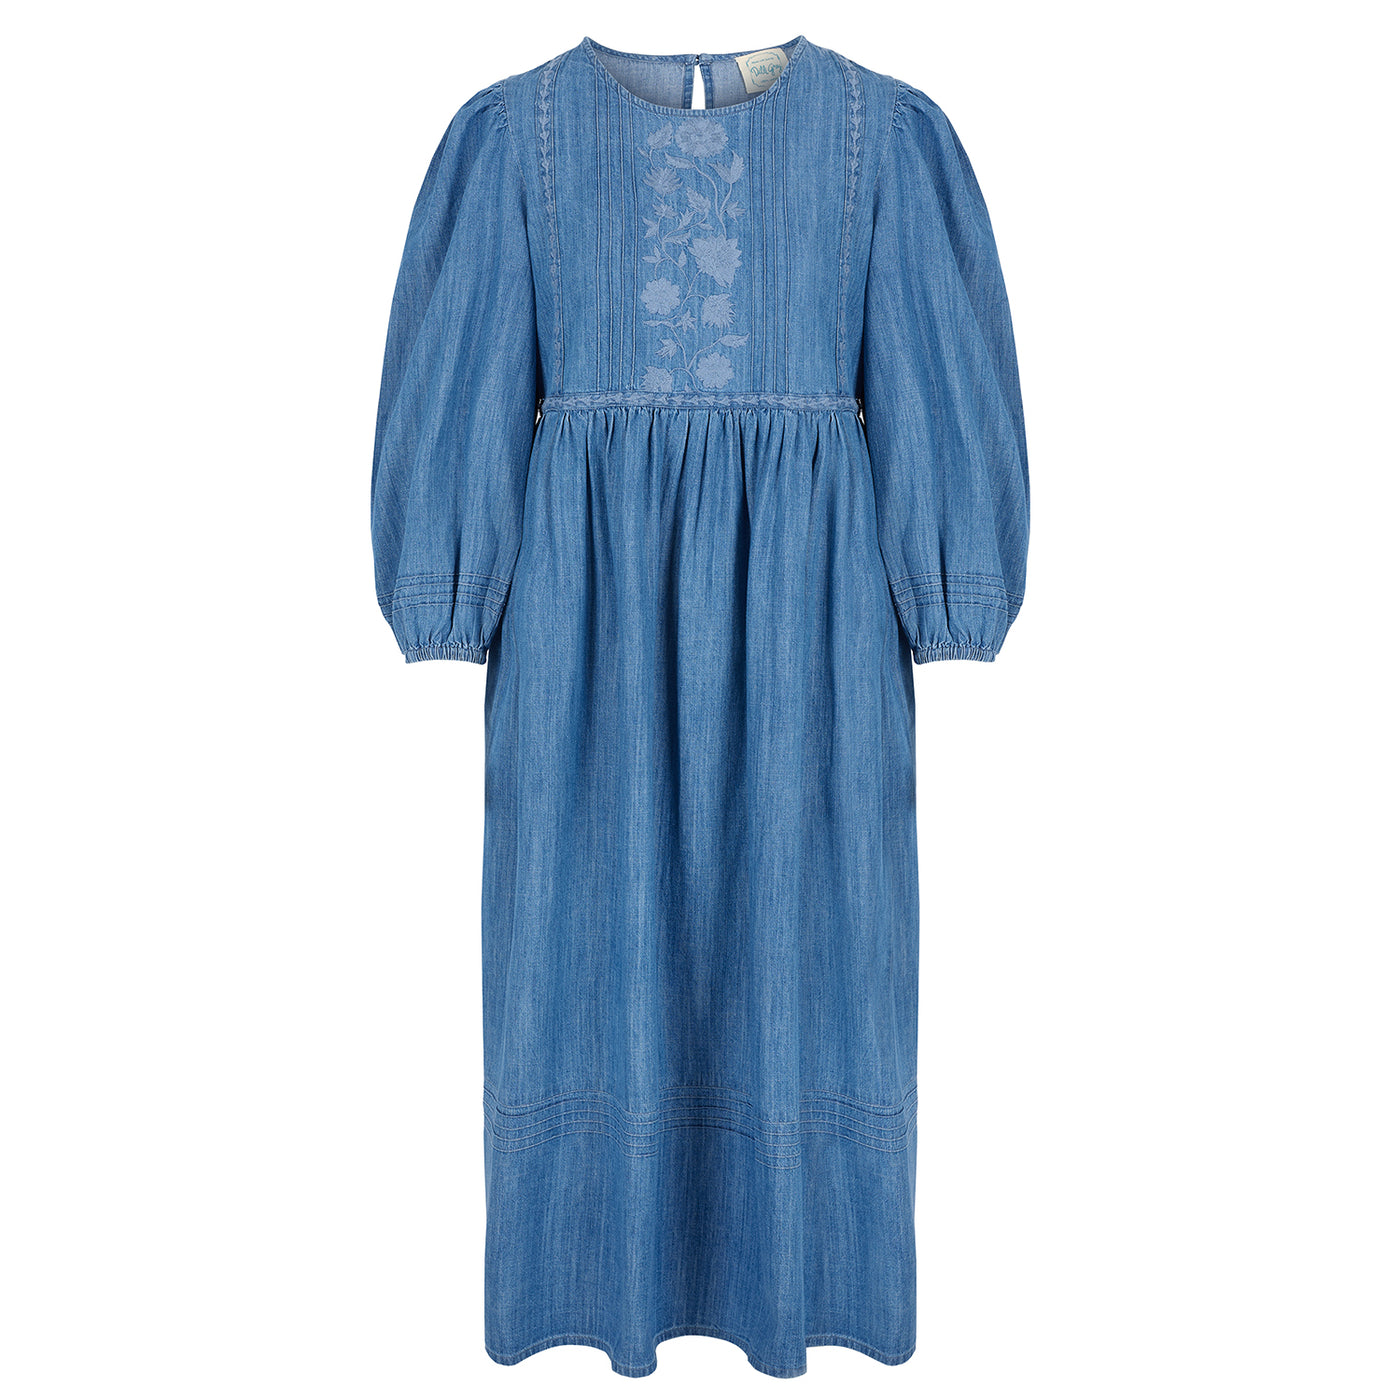 PRE-ORDER: Sona embroidered midaxi dress in vintage wash